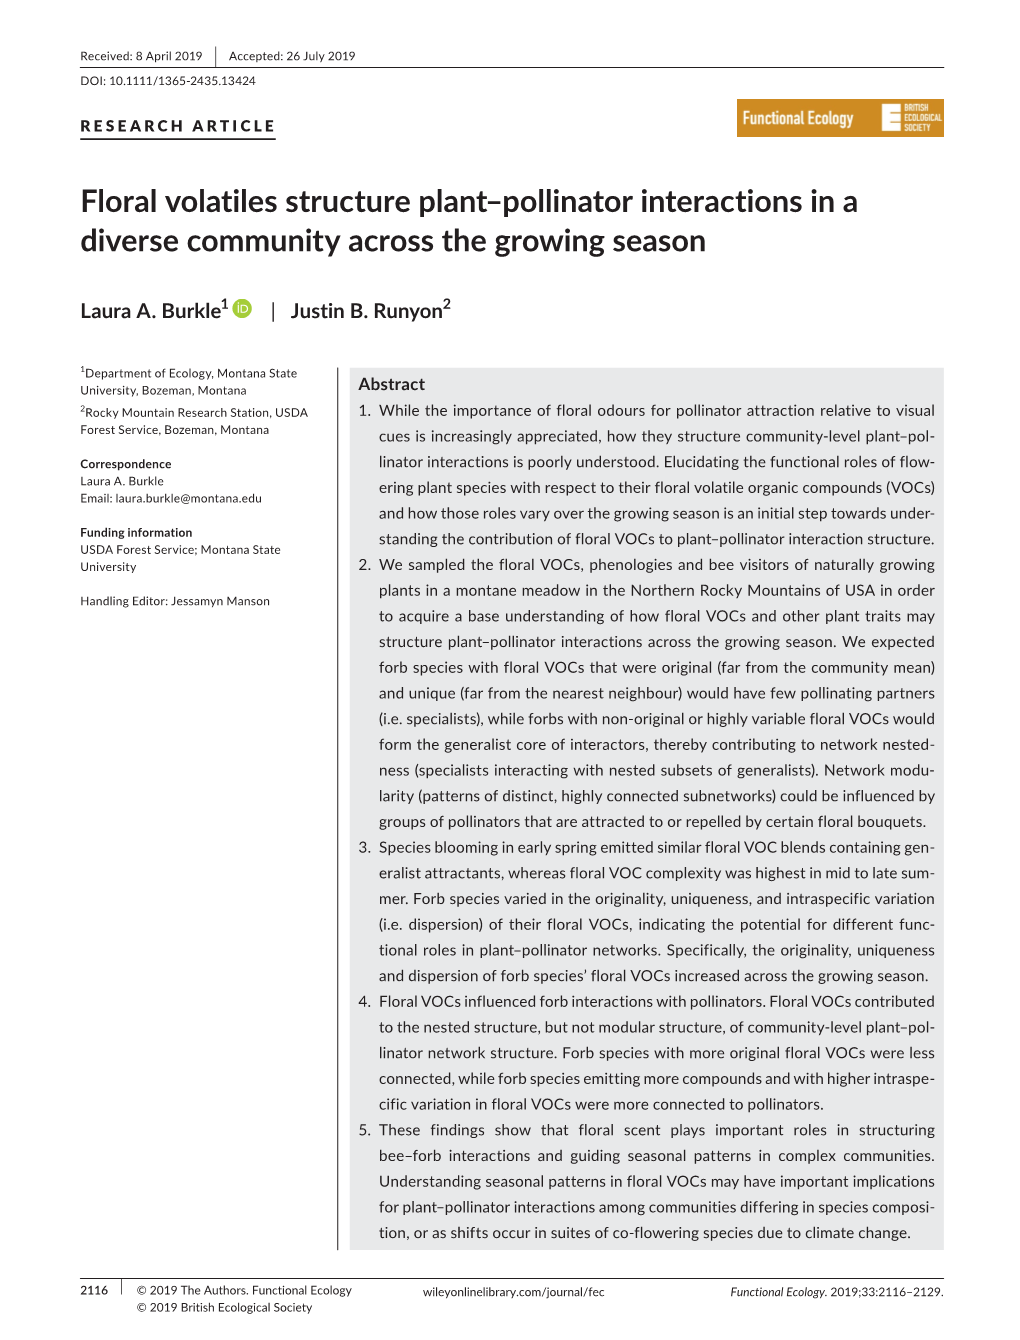 Floral Volatiles Structure Plant-Pollinator Interactions in a Diverse Community Across the Growing Season